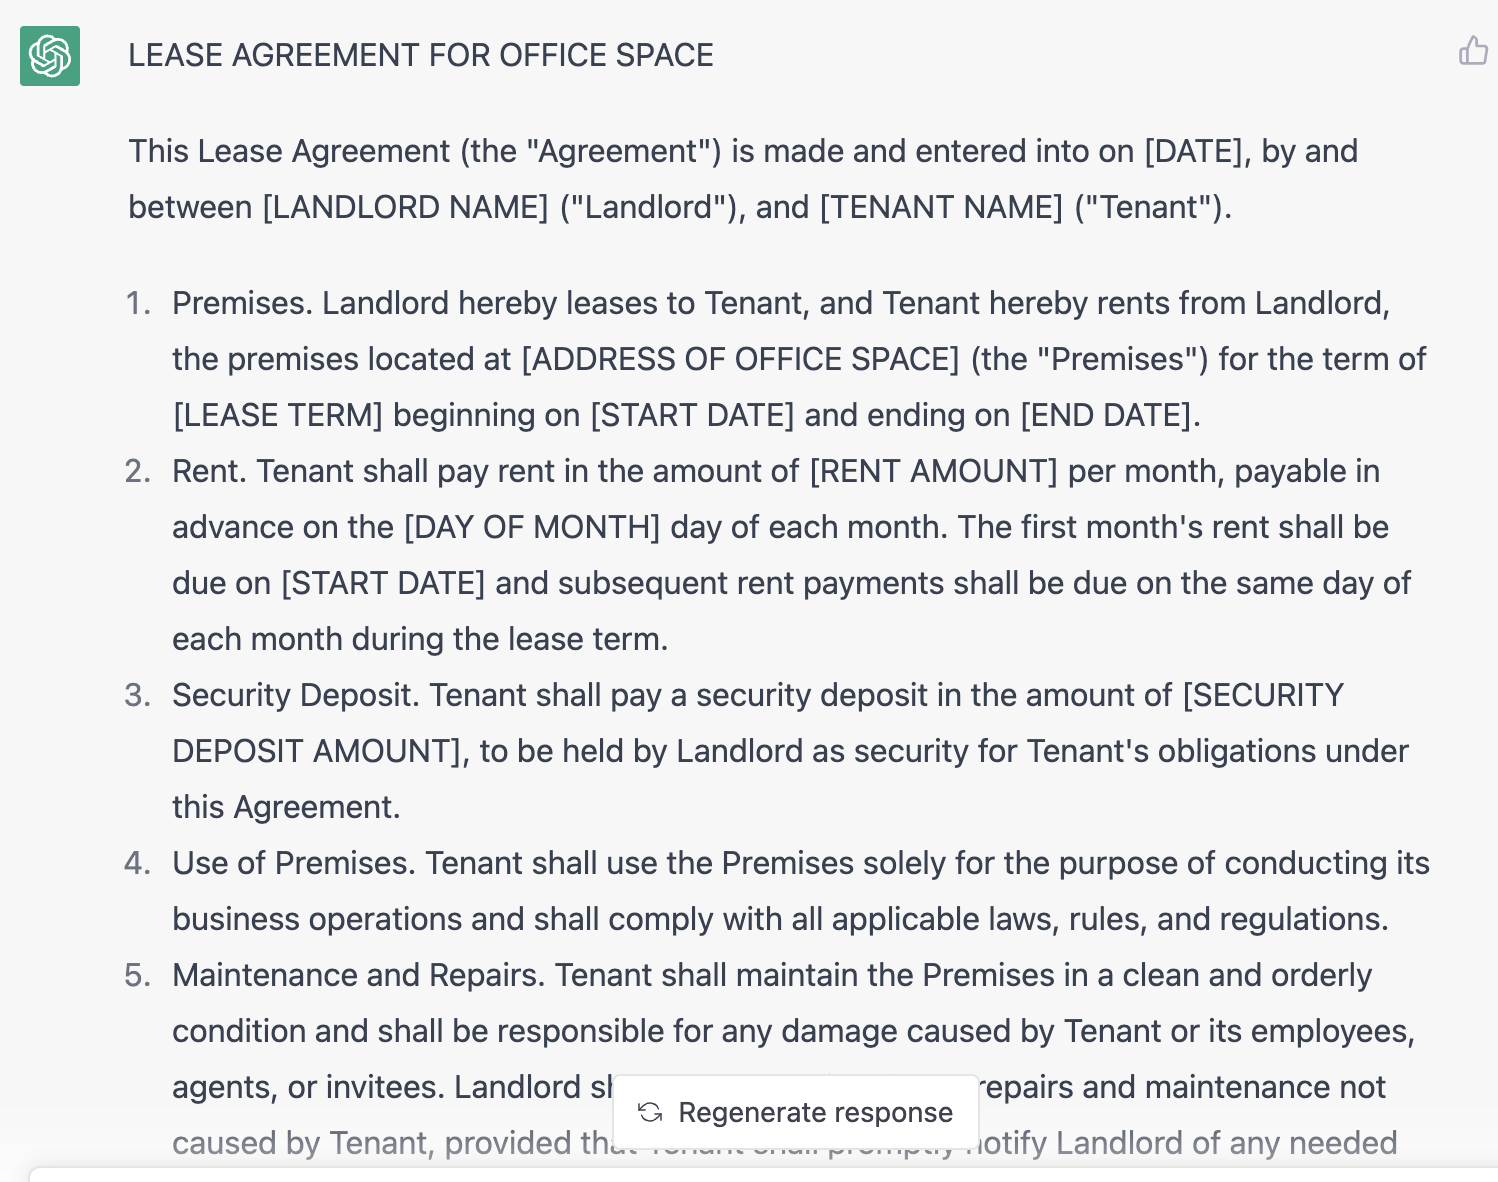 Lease agreement chatgpt